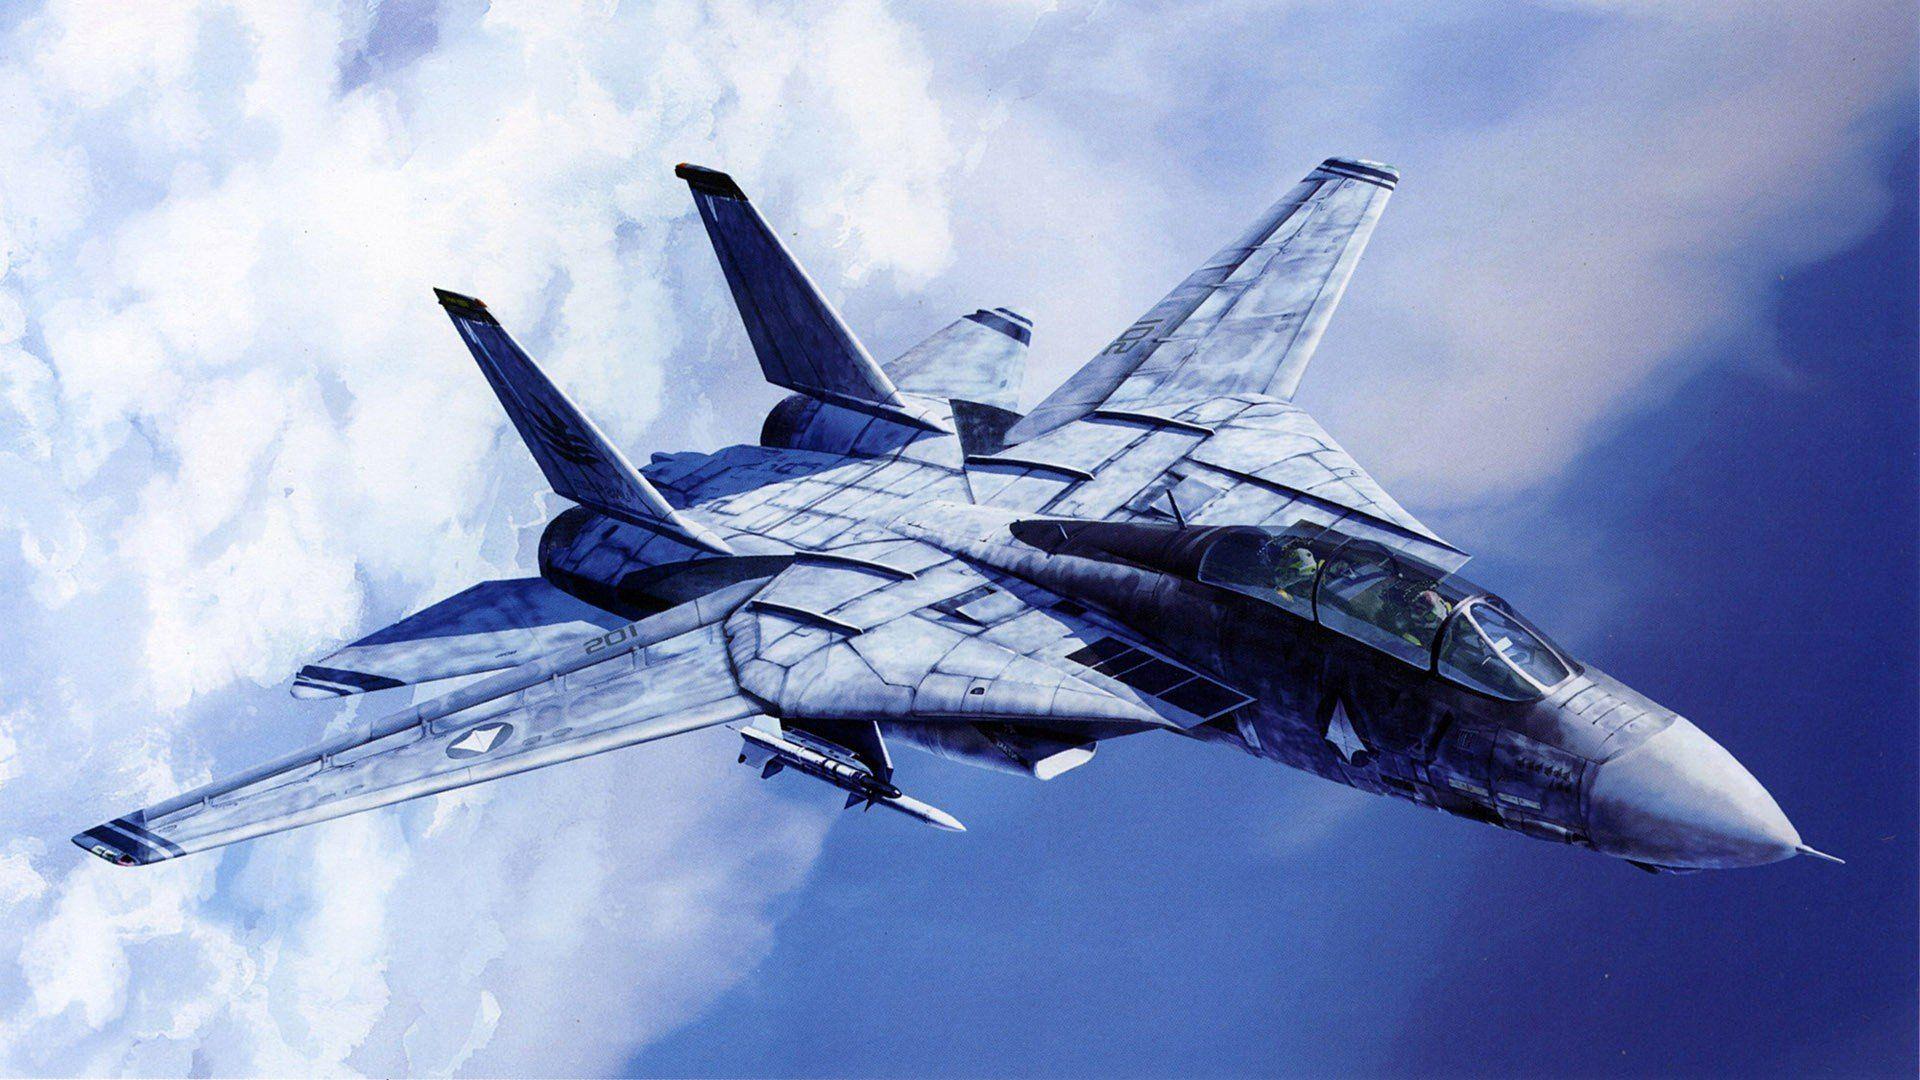 F14 Tomcat wallpaper by tbird57  Download on ZEDGE  331a